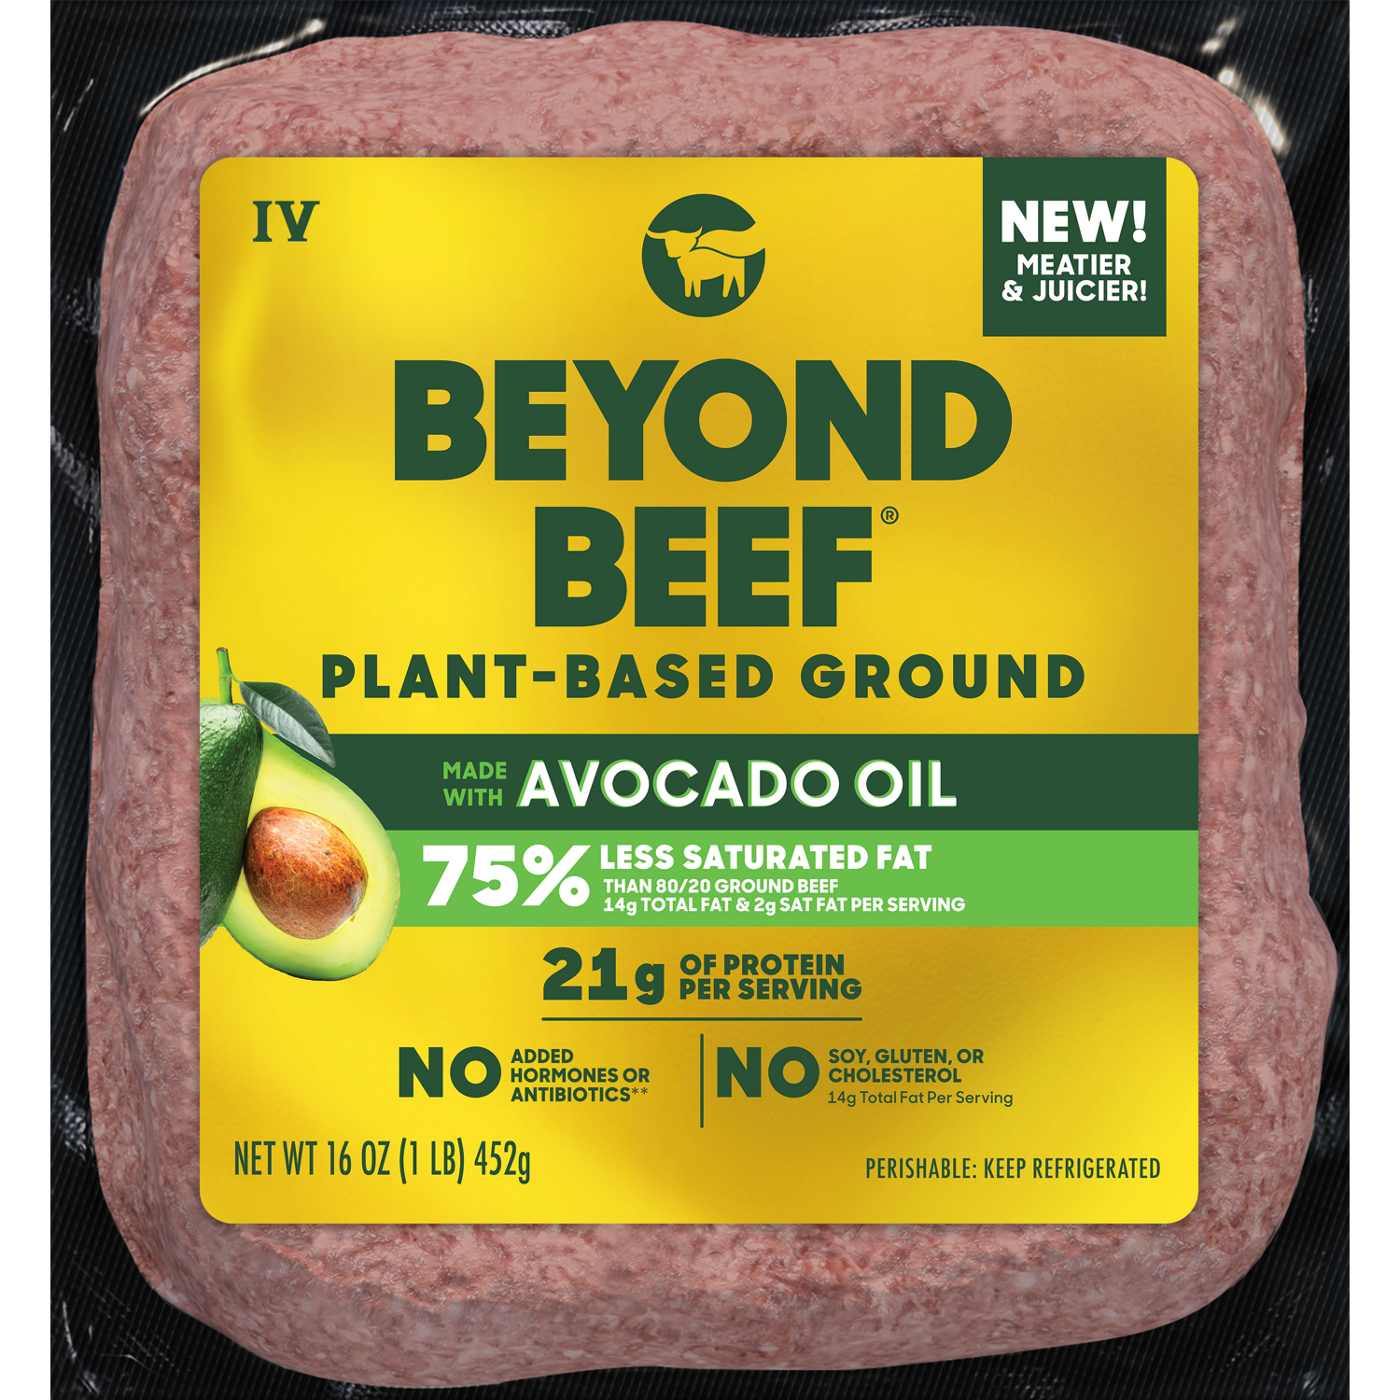 Beyond Meat Beyond Beef Plant-Based Ground; image 1 of 2